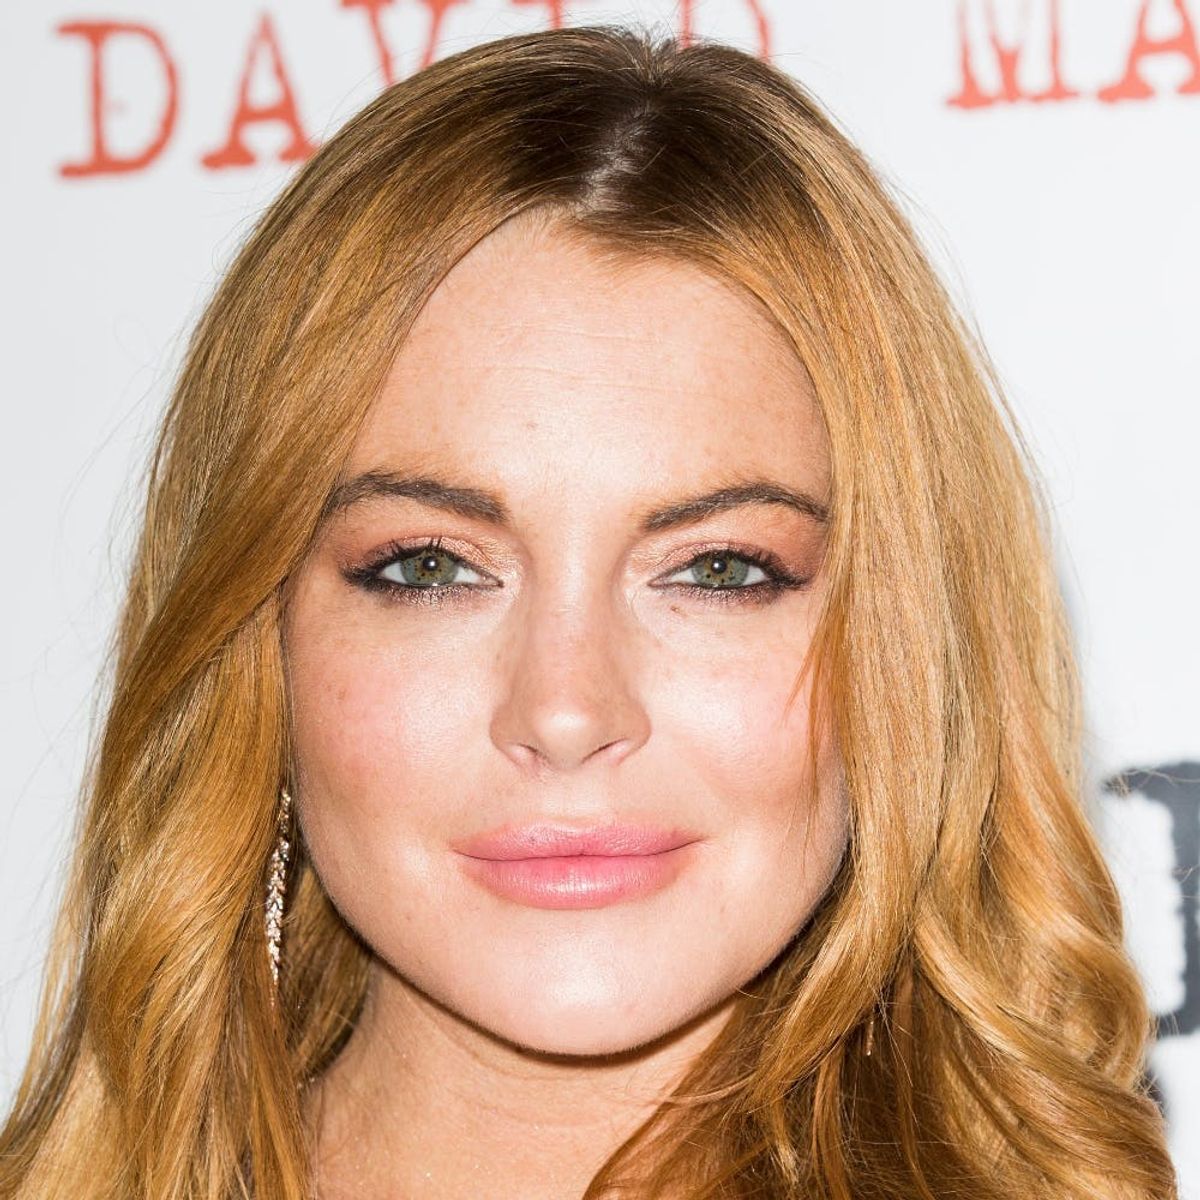 After 5 Months of Dating, Lindsay Lohan Is Engaged